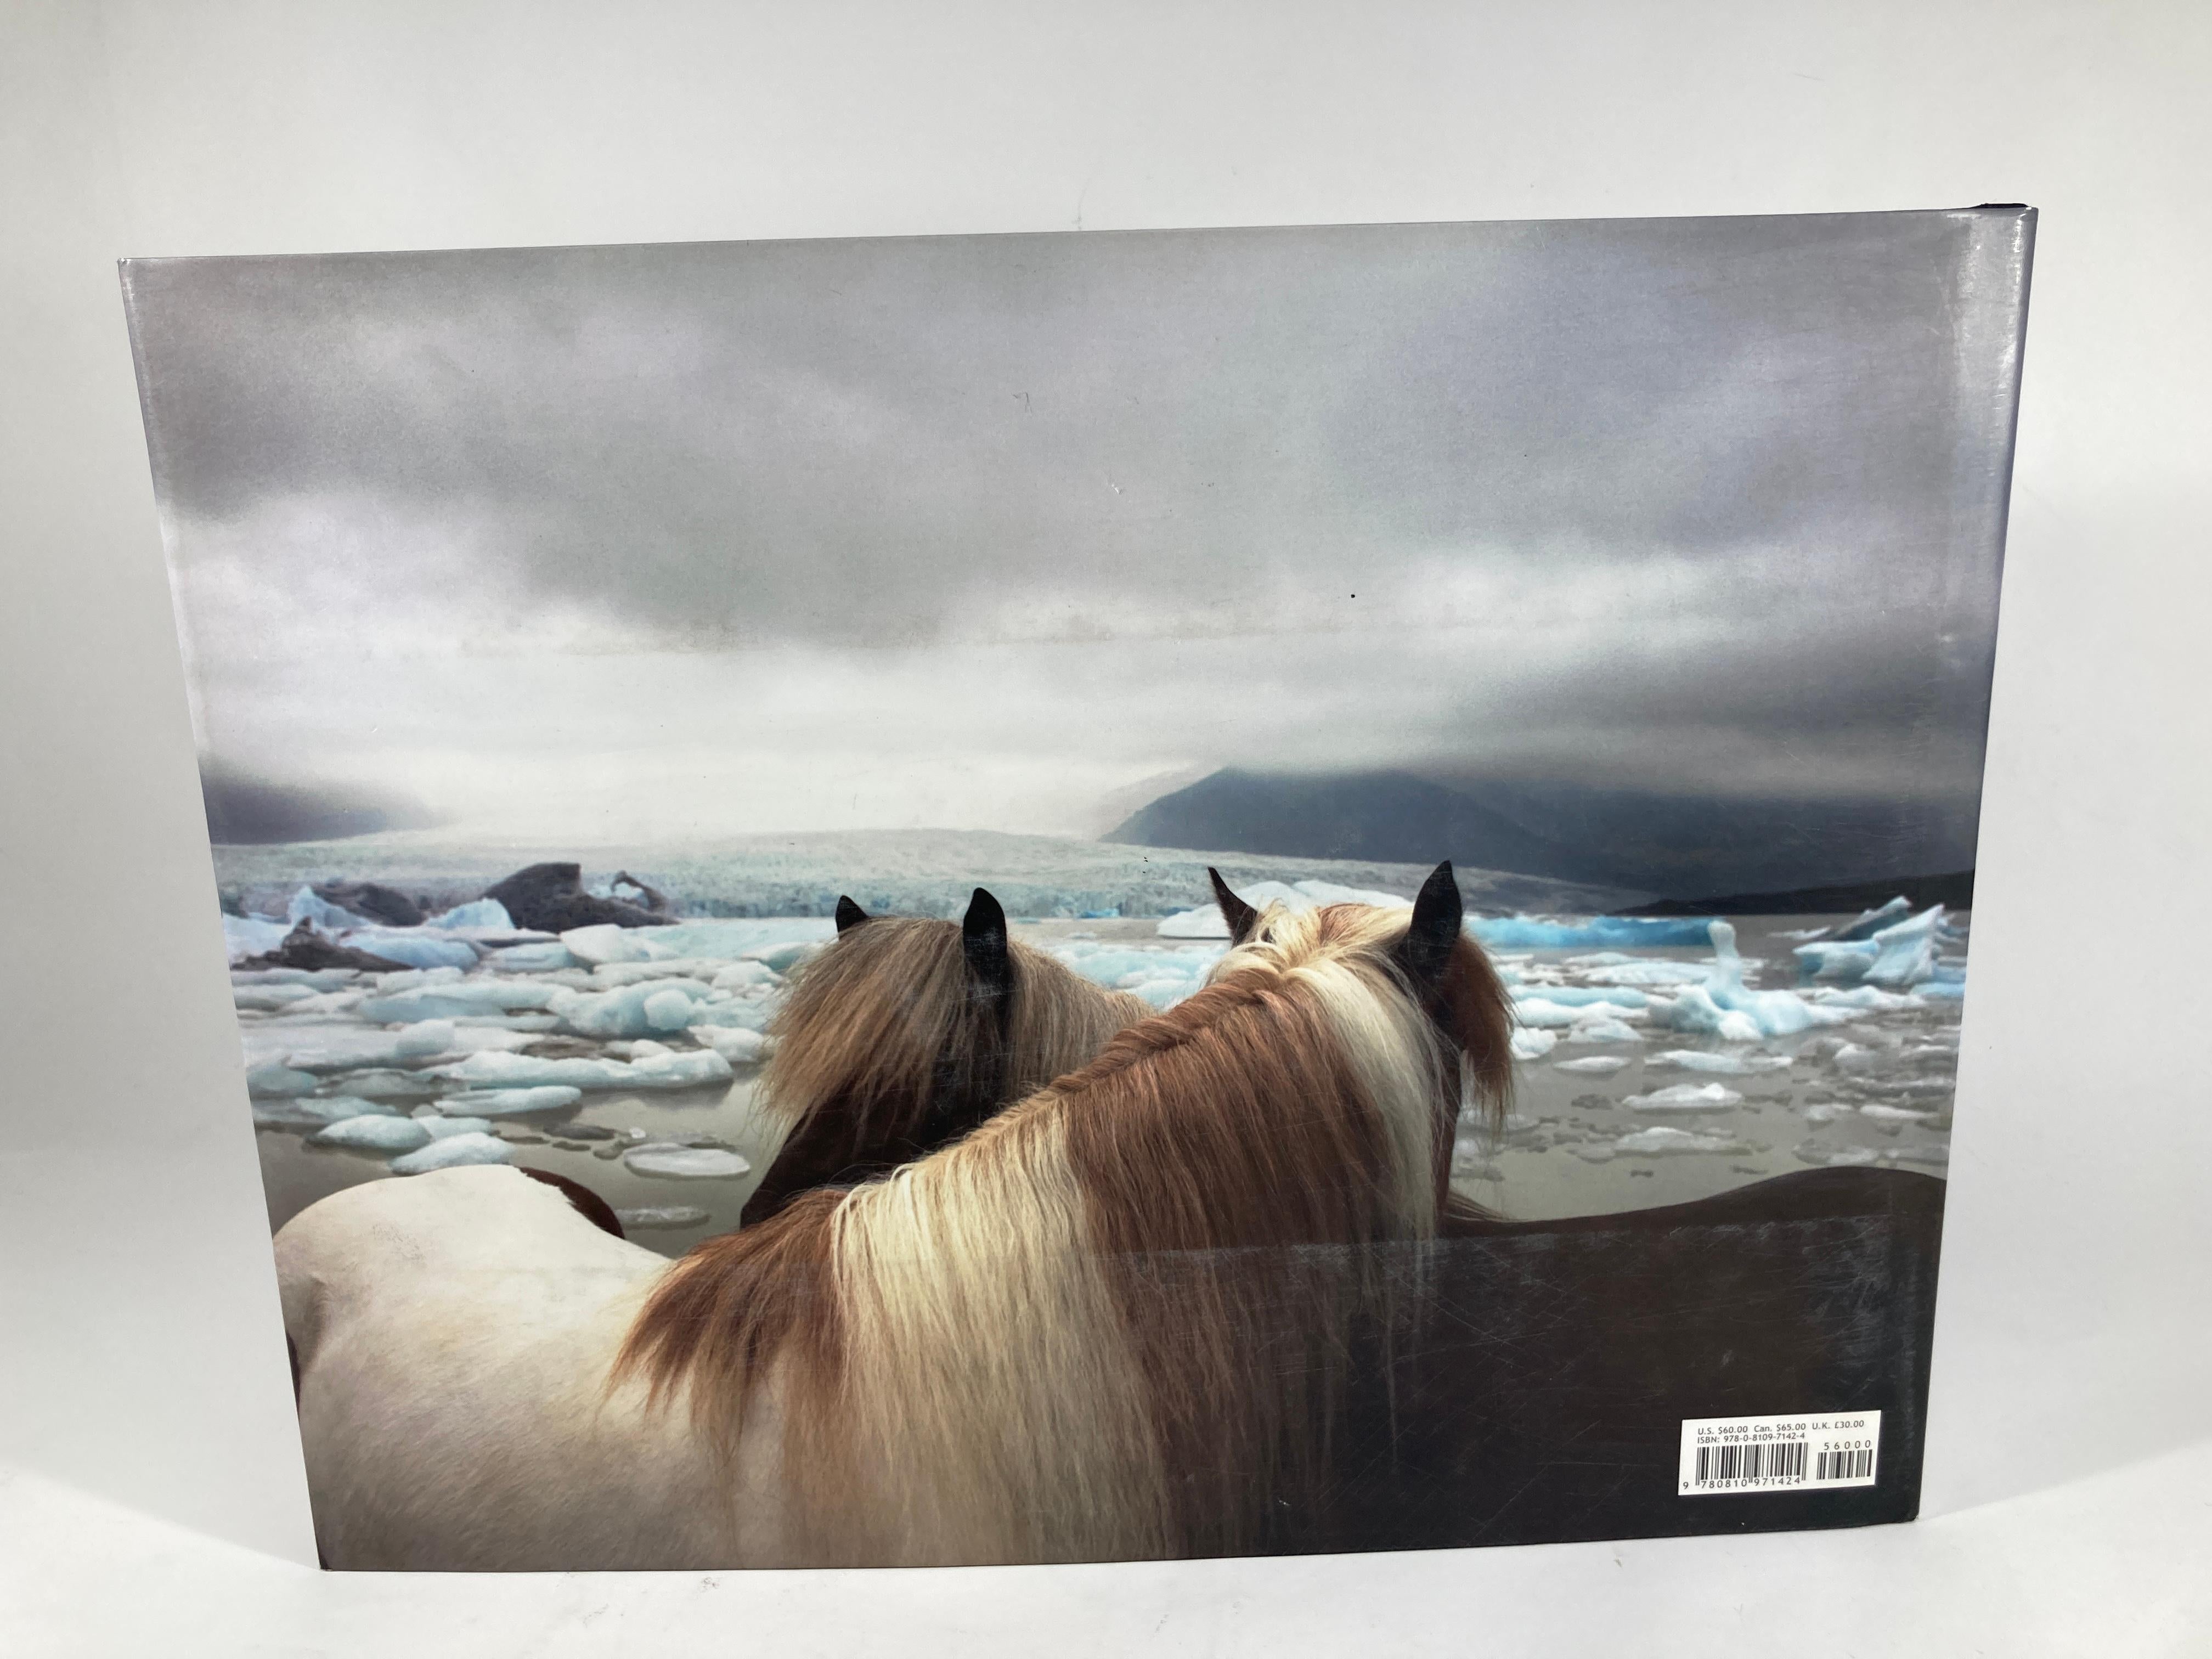 Expressionist Equus by Tim Flach Large Hardcover Large Table Book 1st Edition